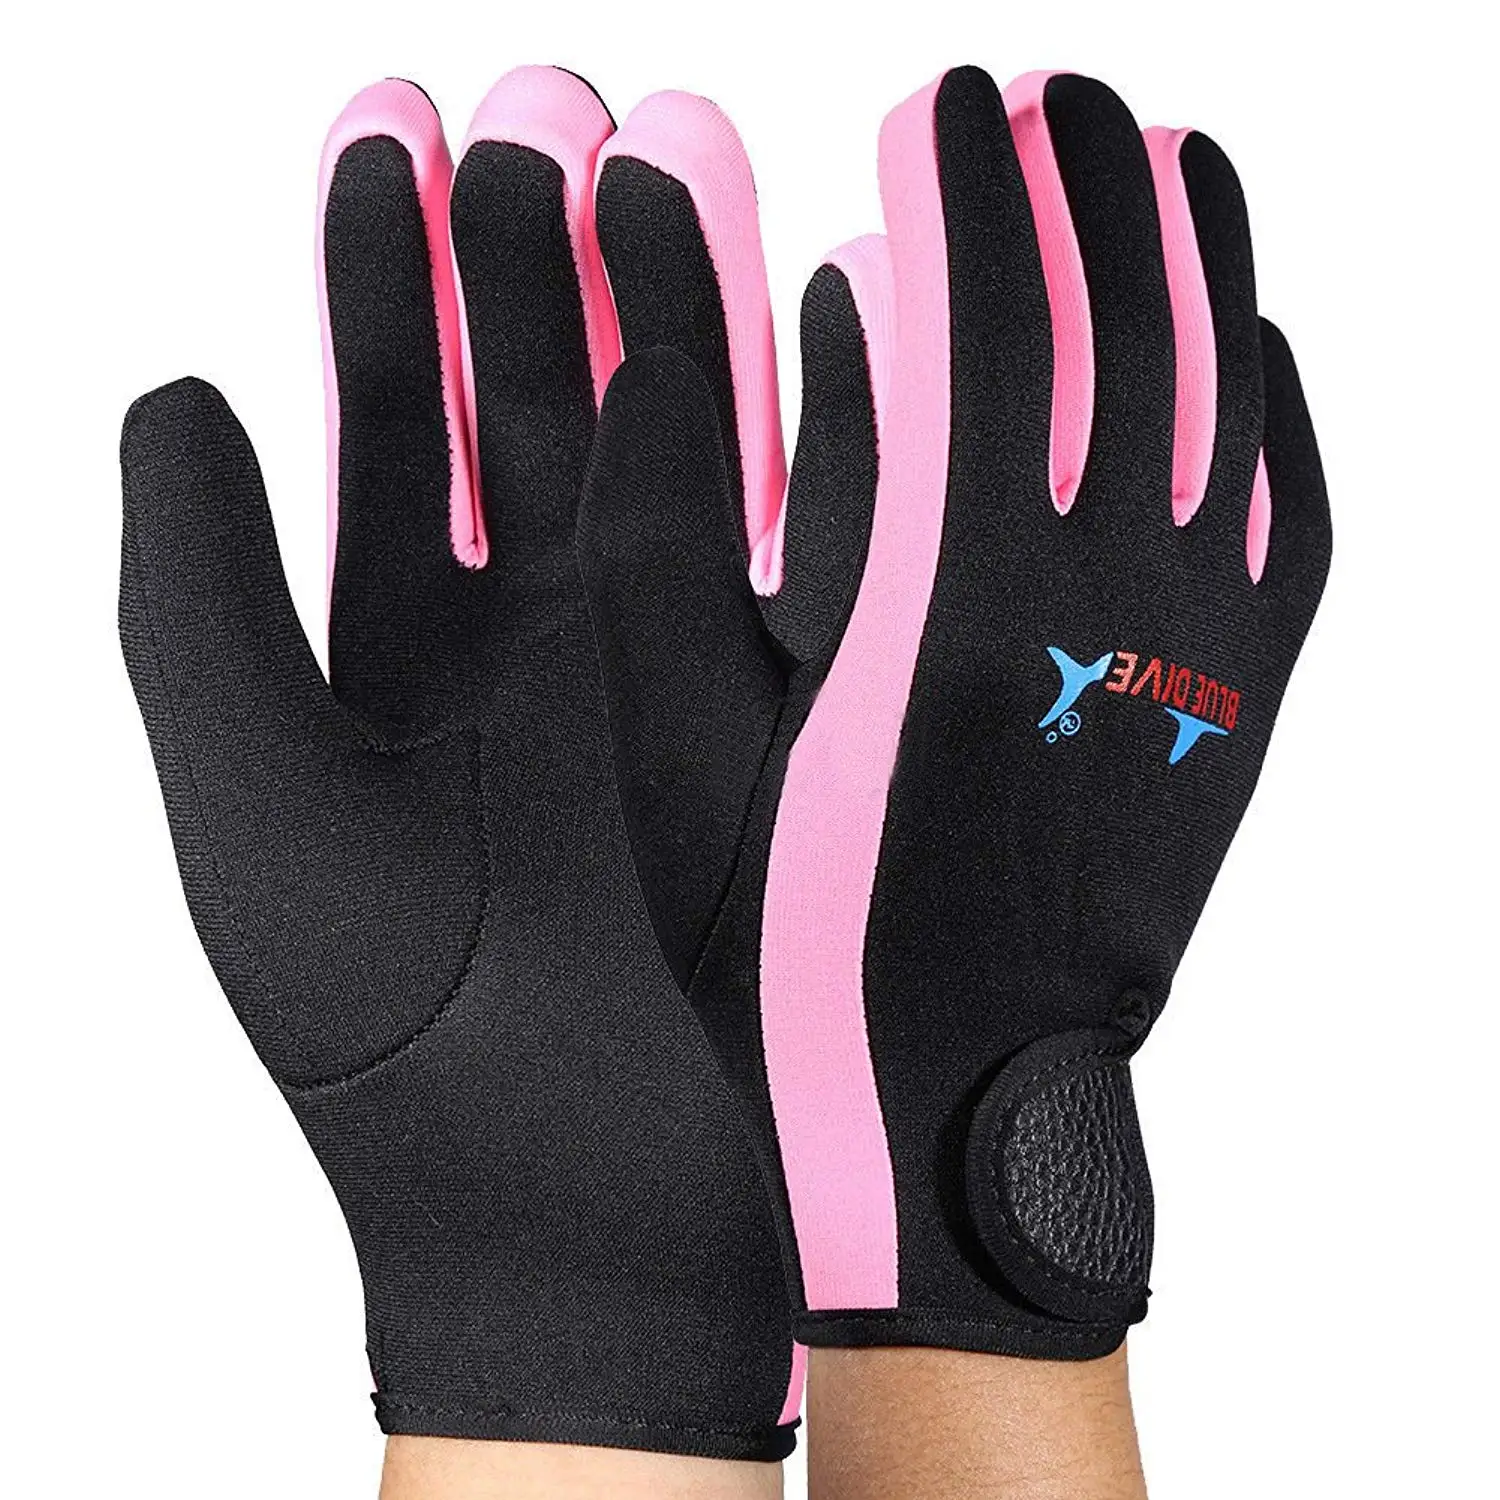 Cheap 5mm Wetsuit Gloves Find 5mm Wetsuit Gloves Deals On Line At 5118